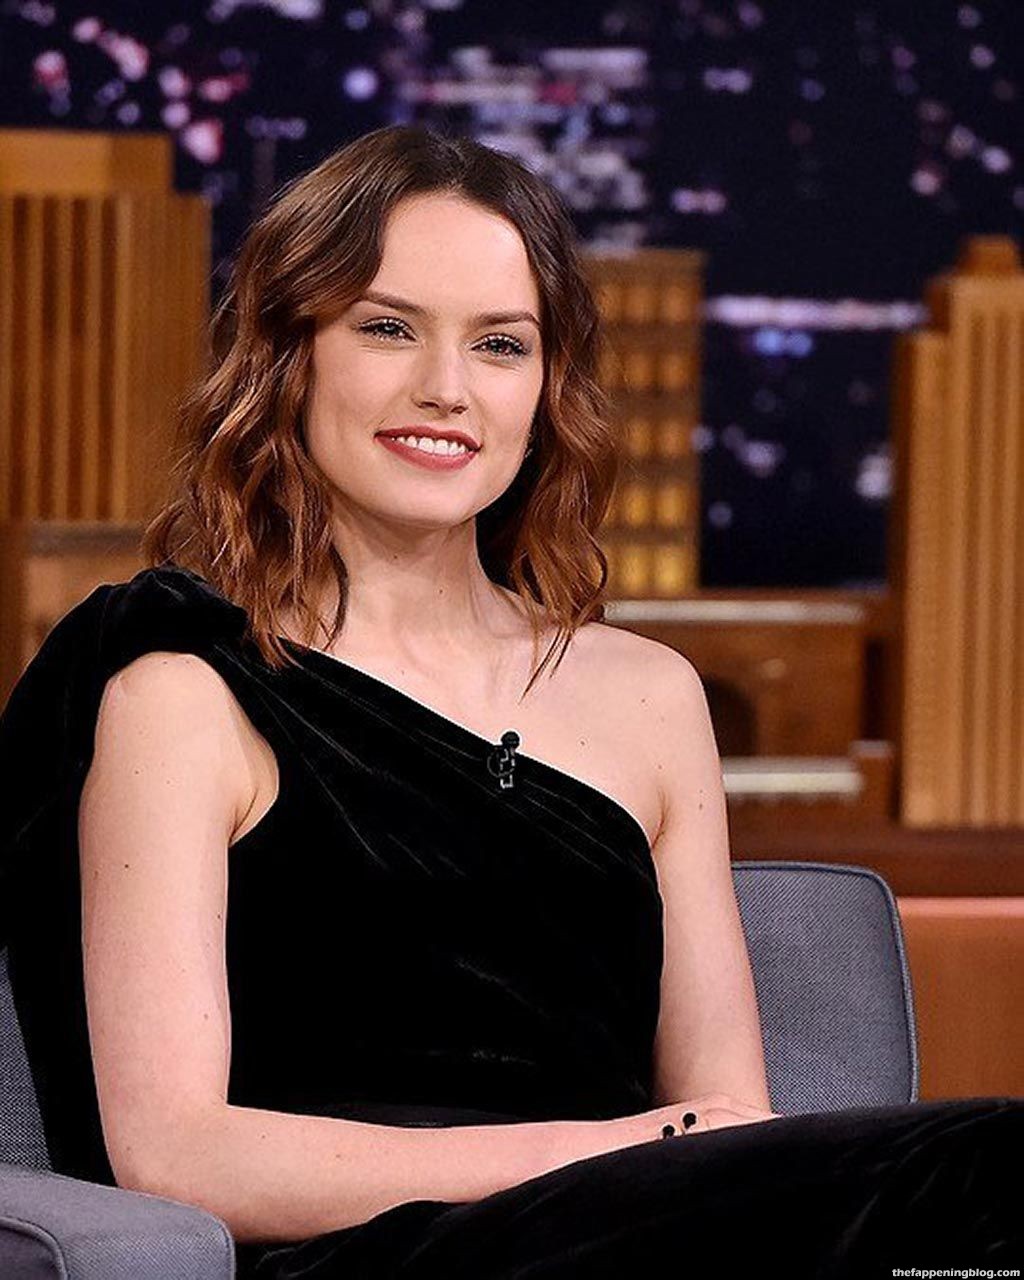 Daisy Ridley Nude &amp; Sexy (134 Photos + Possible LEAKED Porn &amp; Topless Scenes) [Updated 10/07/21]